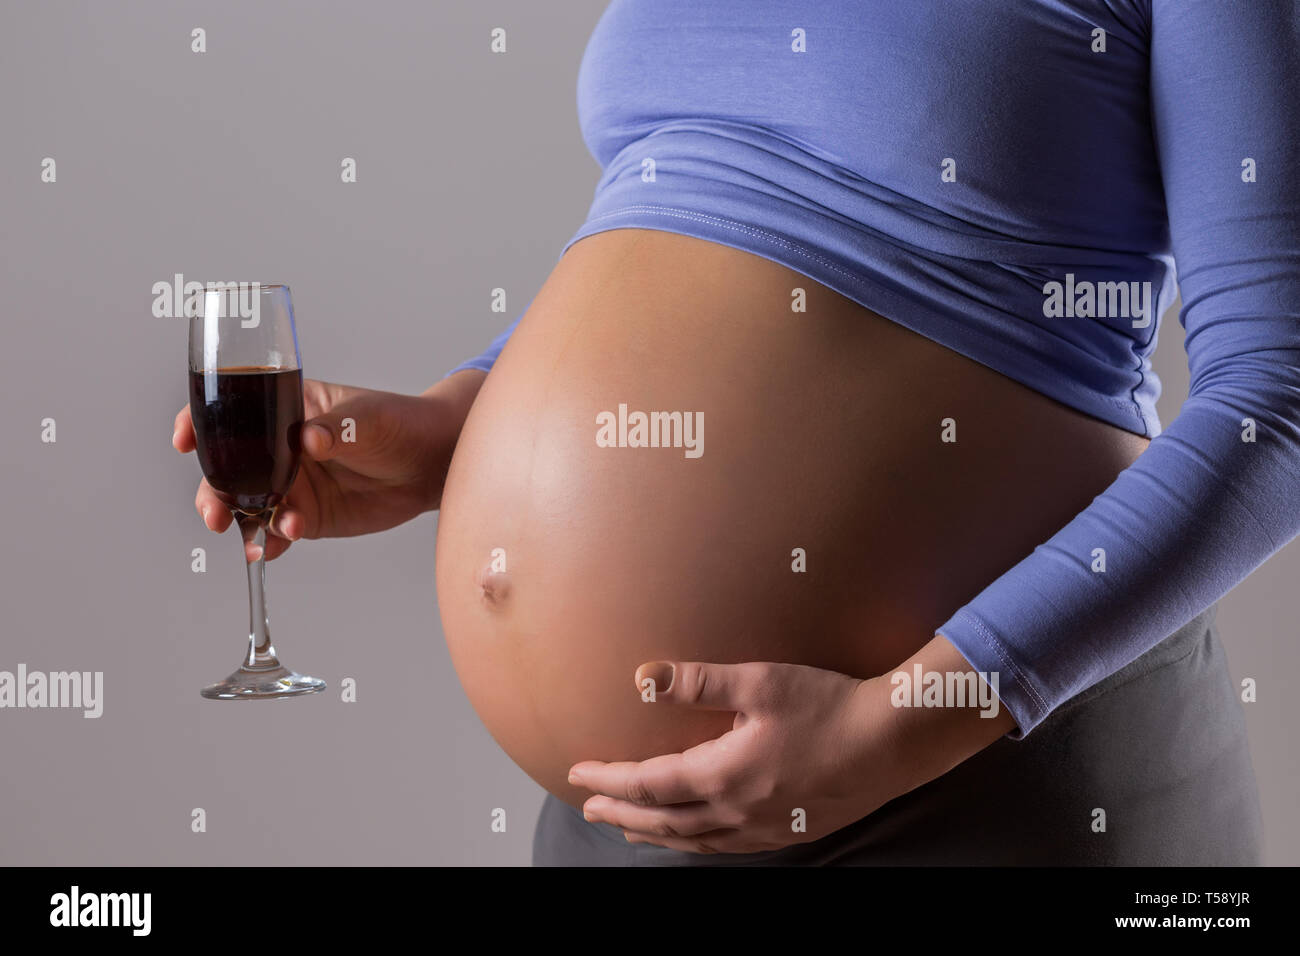 Image of pregnant woman drinking wine on gray background. Stock Photo